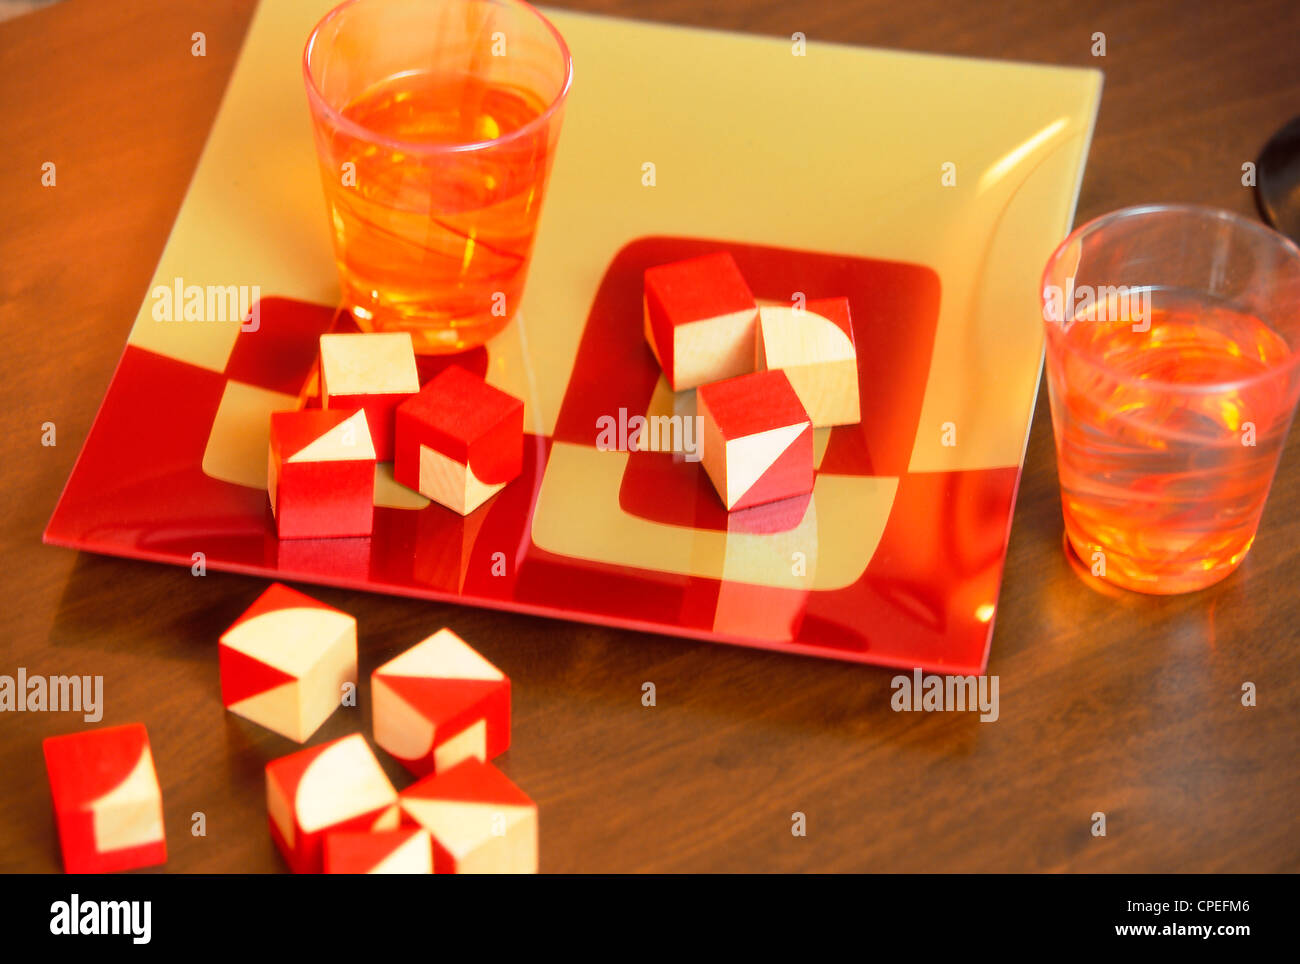 Drinking Glass, Tray And Cubes On Table Stock Photo